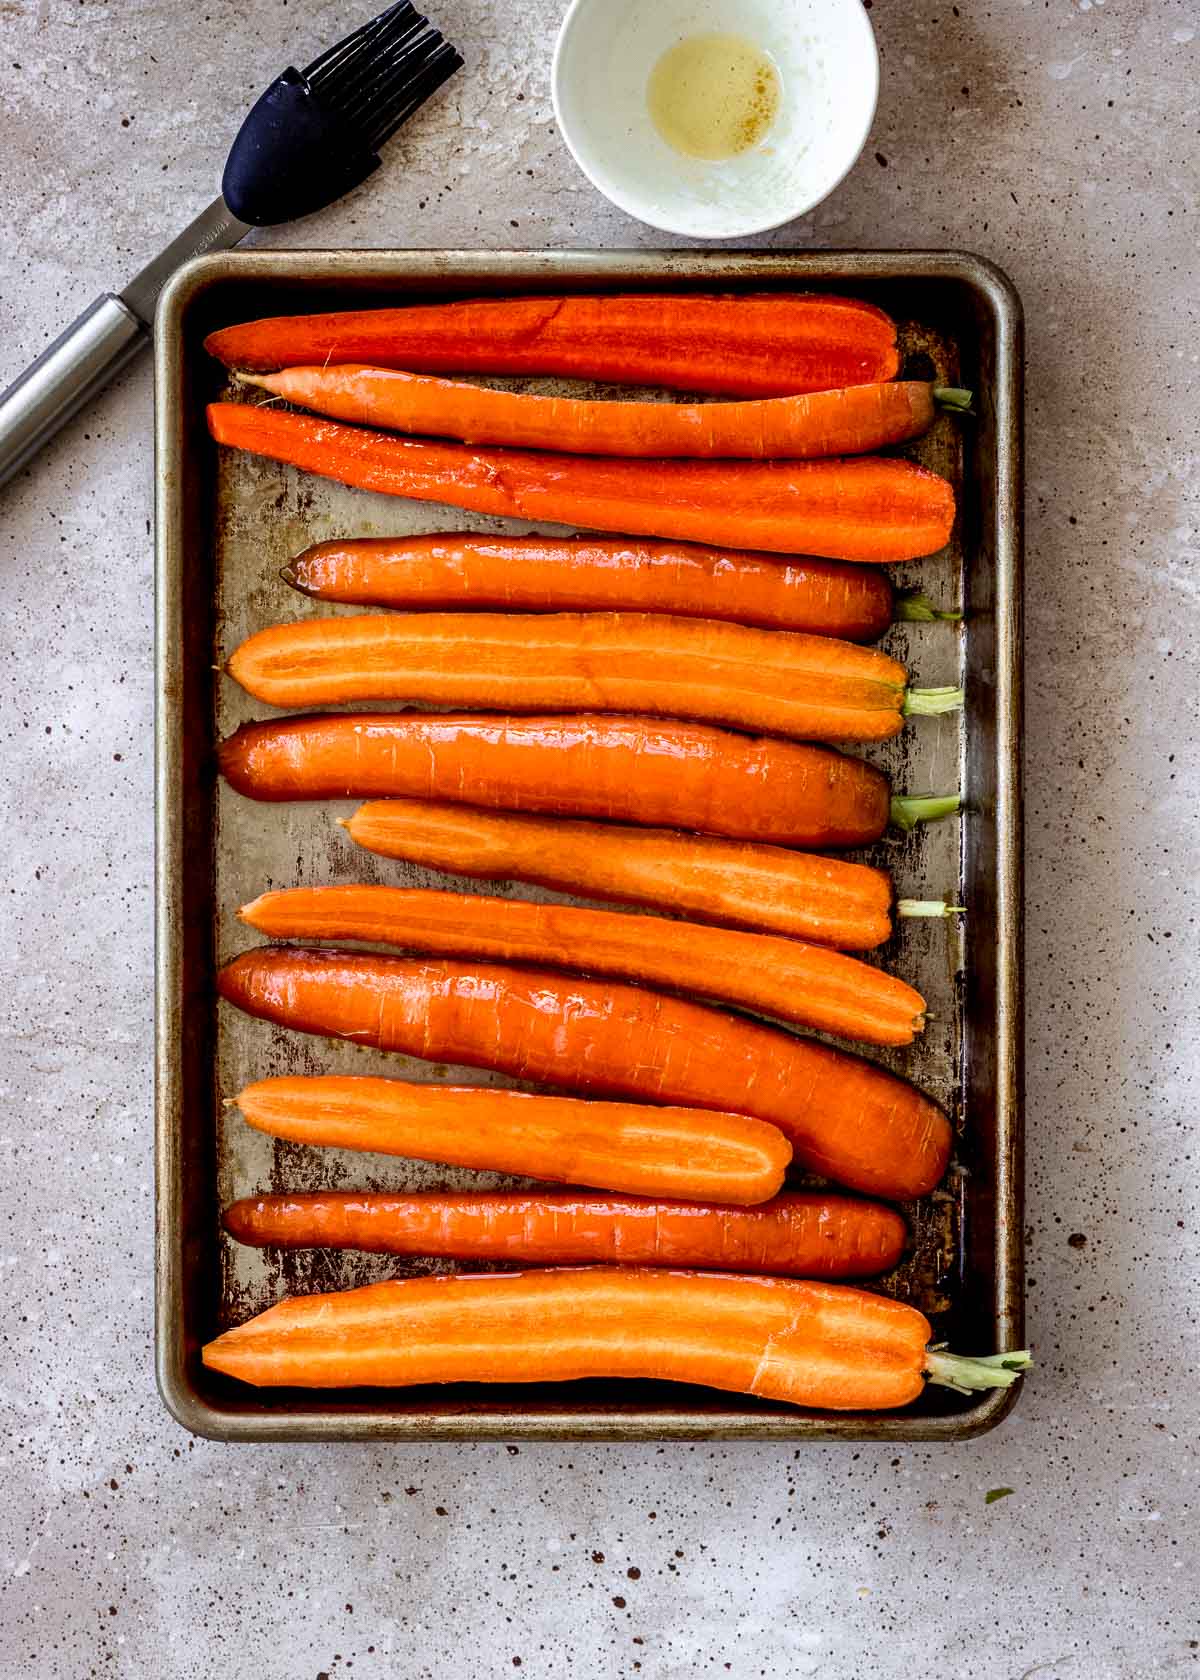 Uncooked carrots sliced in half on a baking sheet, brushed with olive oil and maple syrup. Pastry brush is nearby.